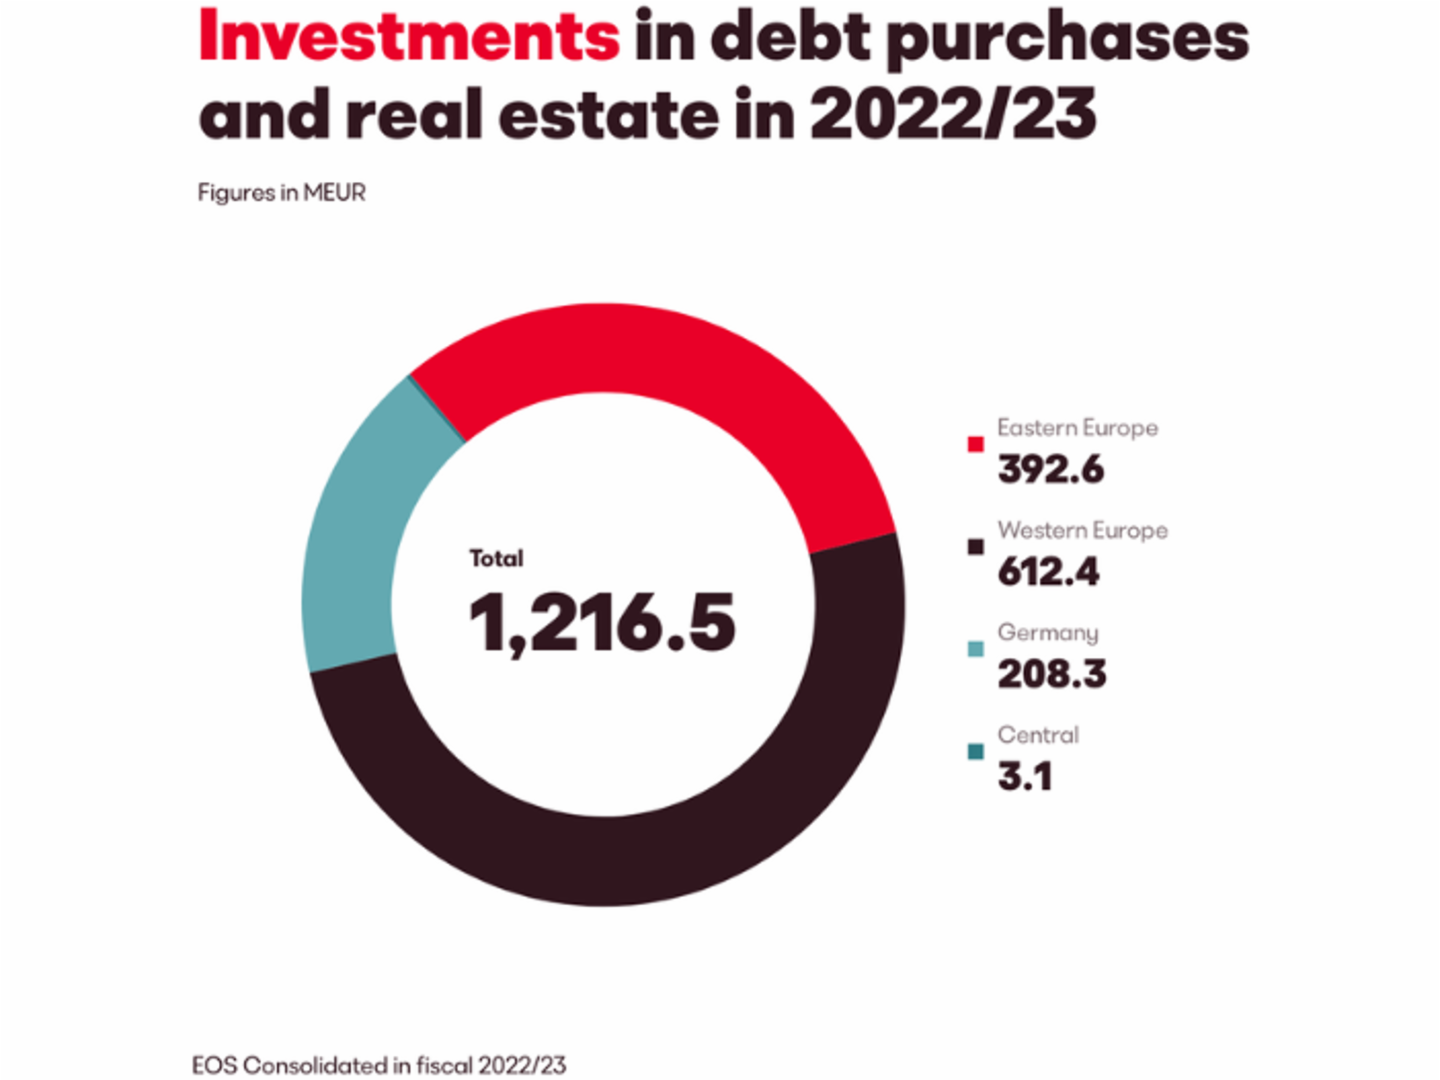 EOS investments in debt purchases and real estate in 2022-23